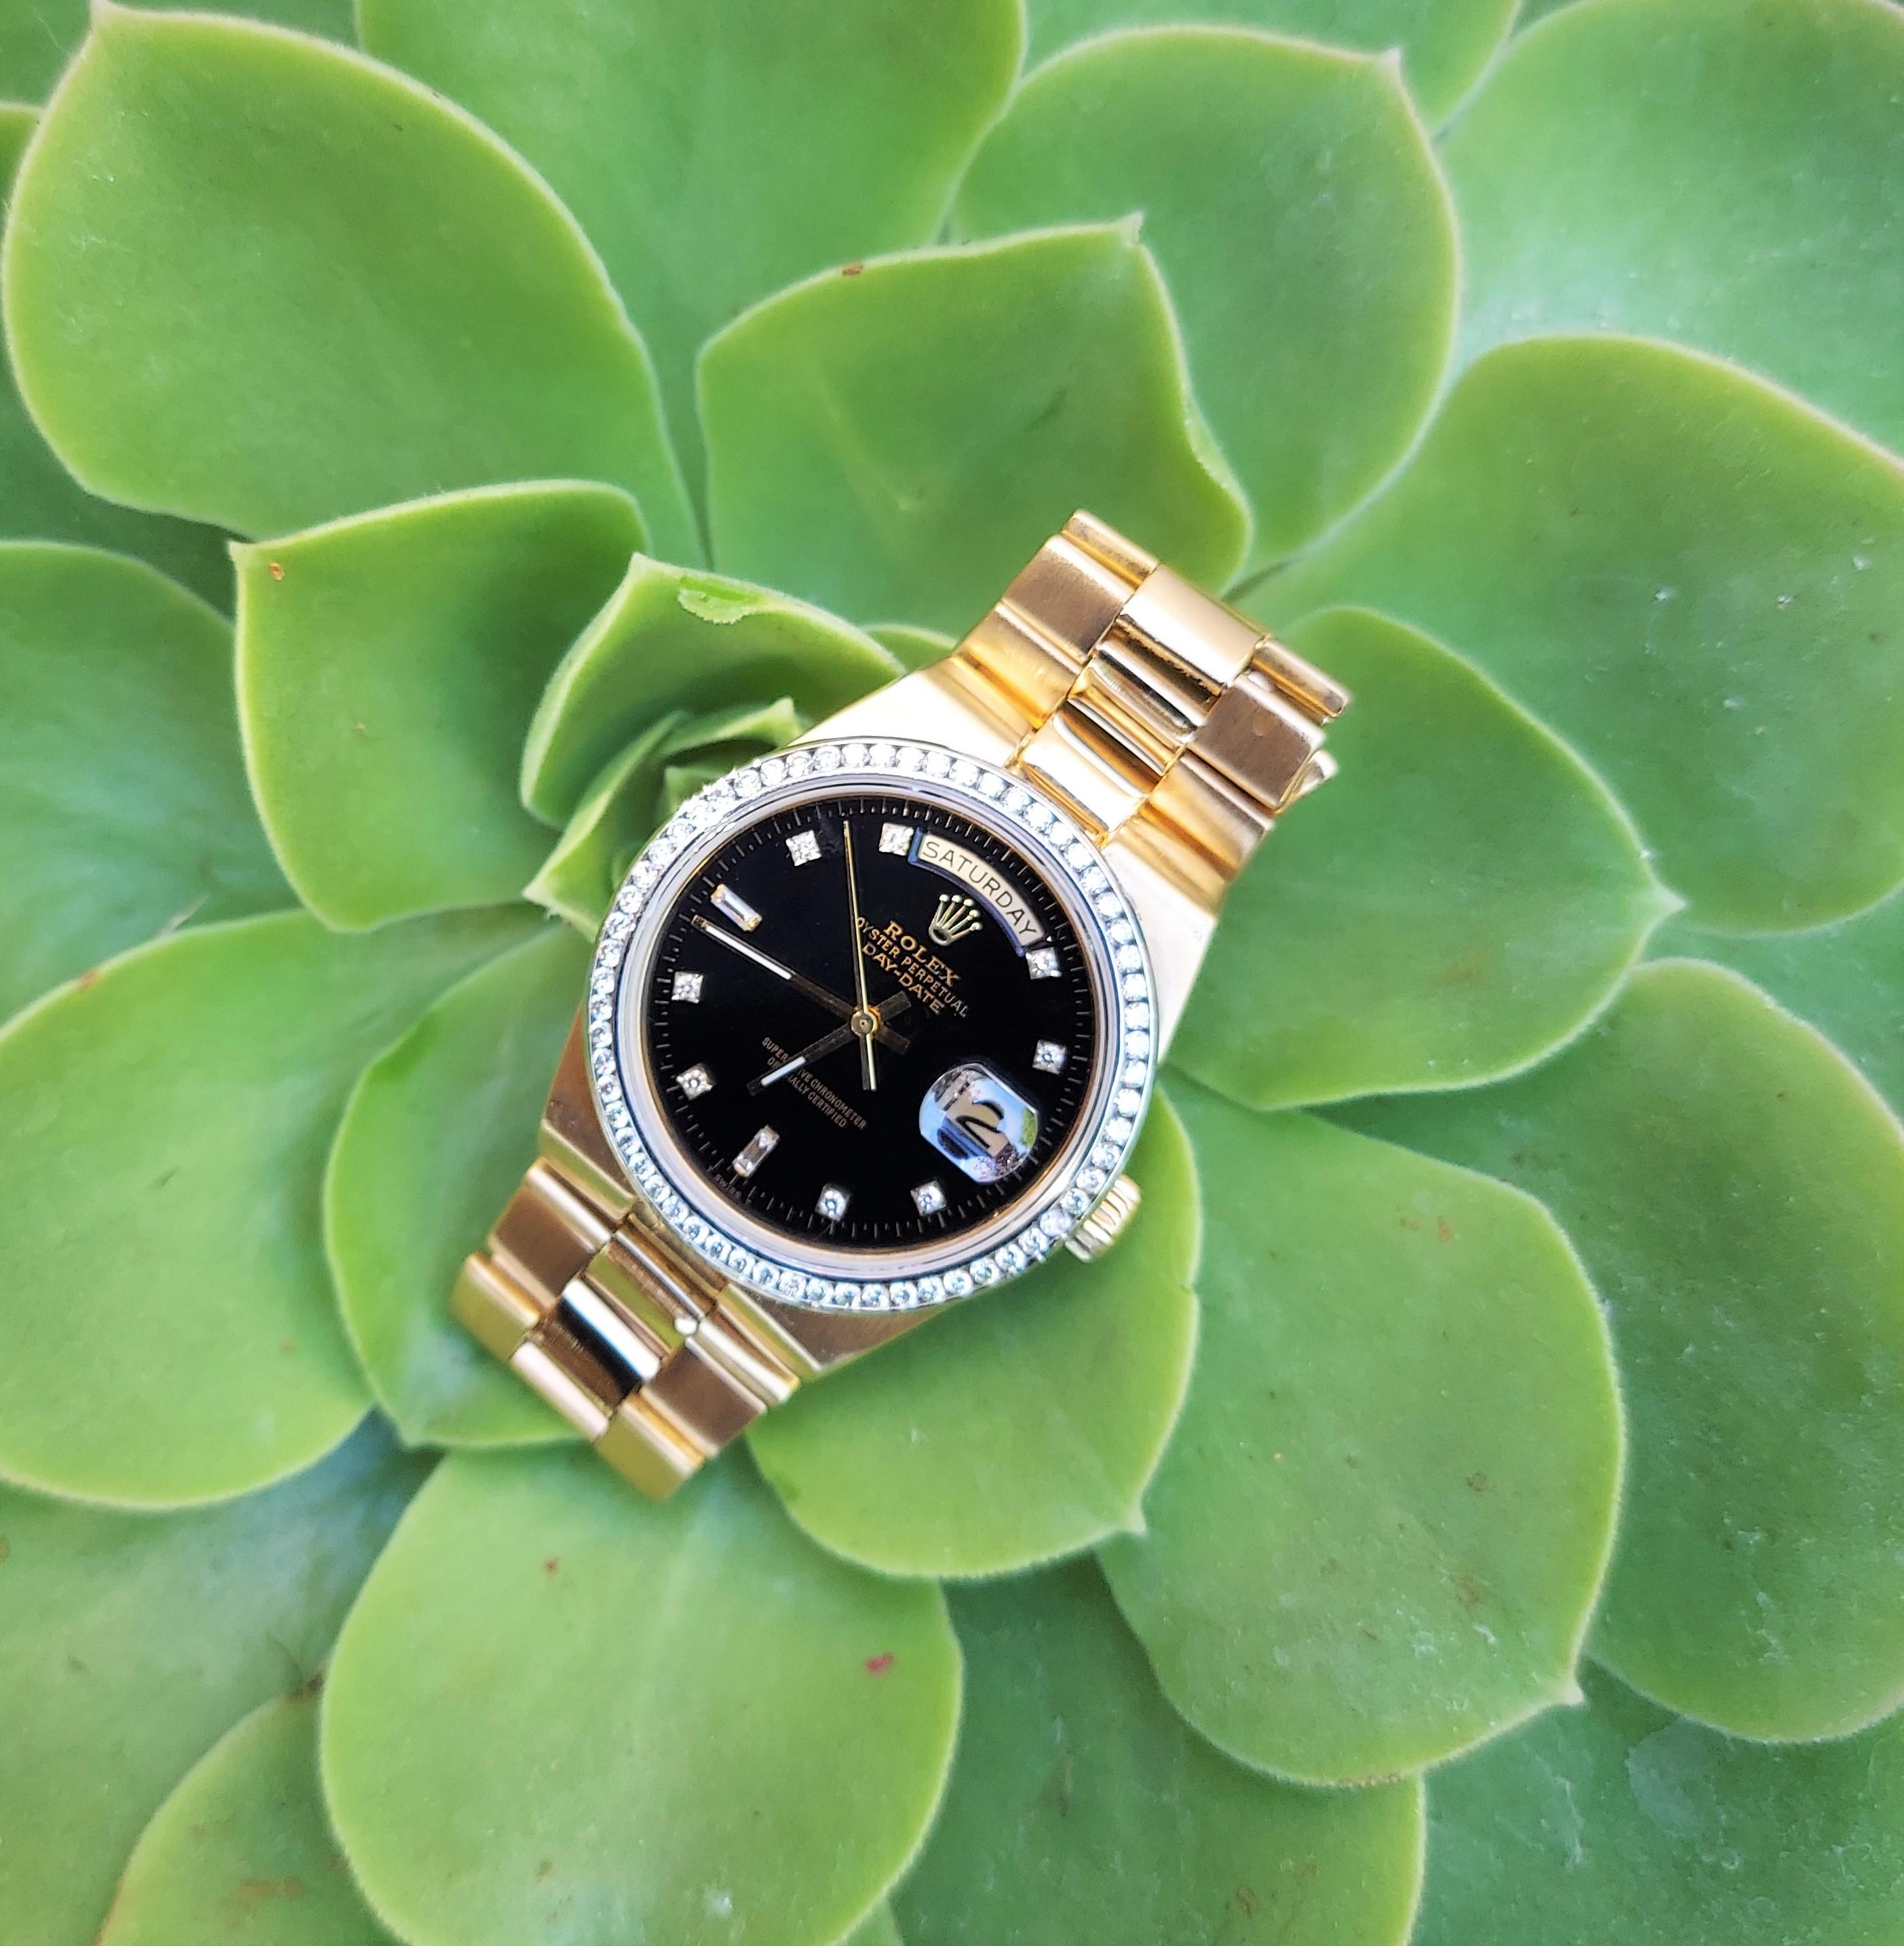 Brand - Rolex
Model - 19018
Style - Day-Date Quartz
Metals - 18k Yellow Gold
Case size - 36mm
Movement - Rolex Quartz
Crystal - sapphire
Band - Rolex Oyster Gold
Wrist size - 7 1/2 inches 
